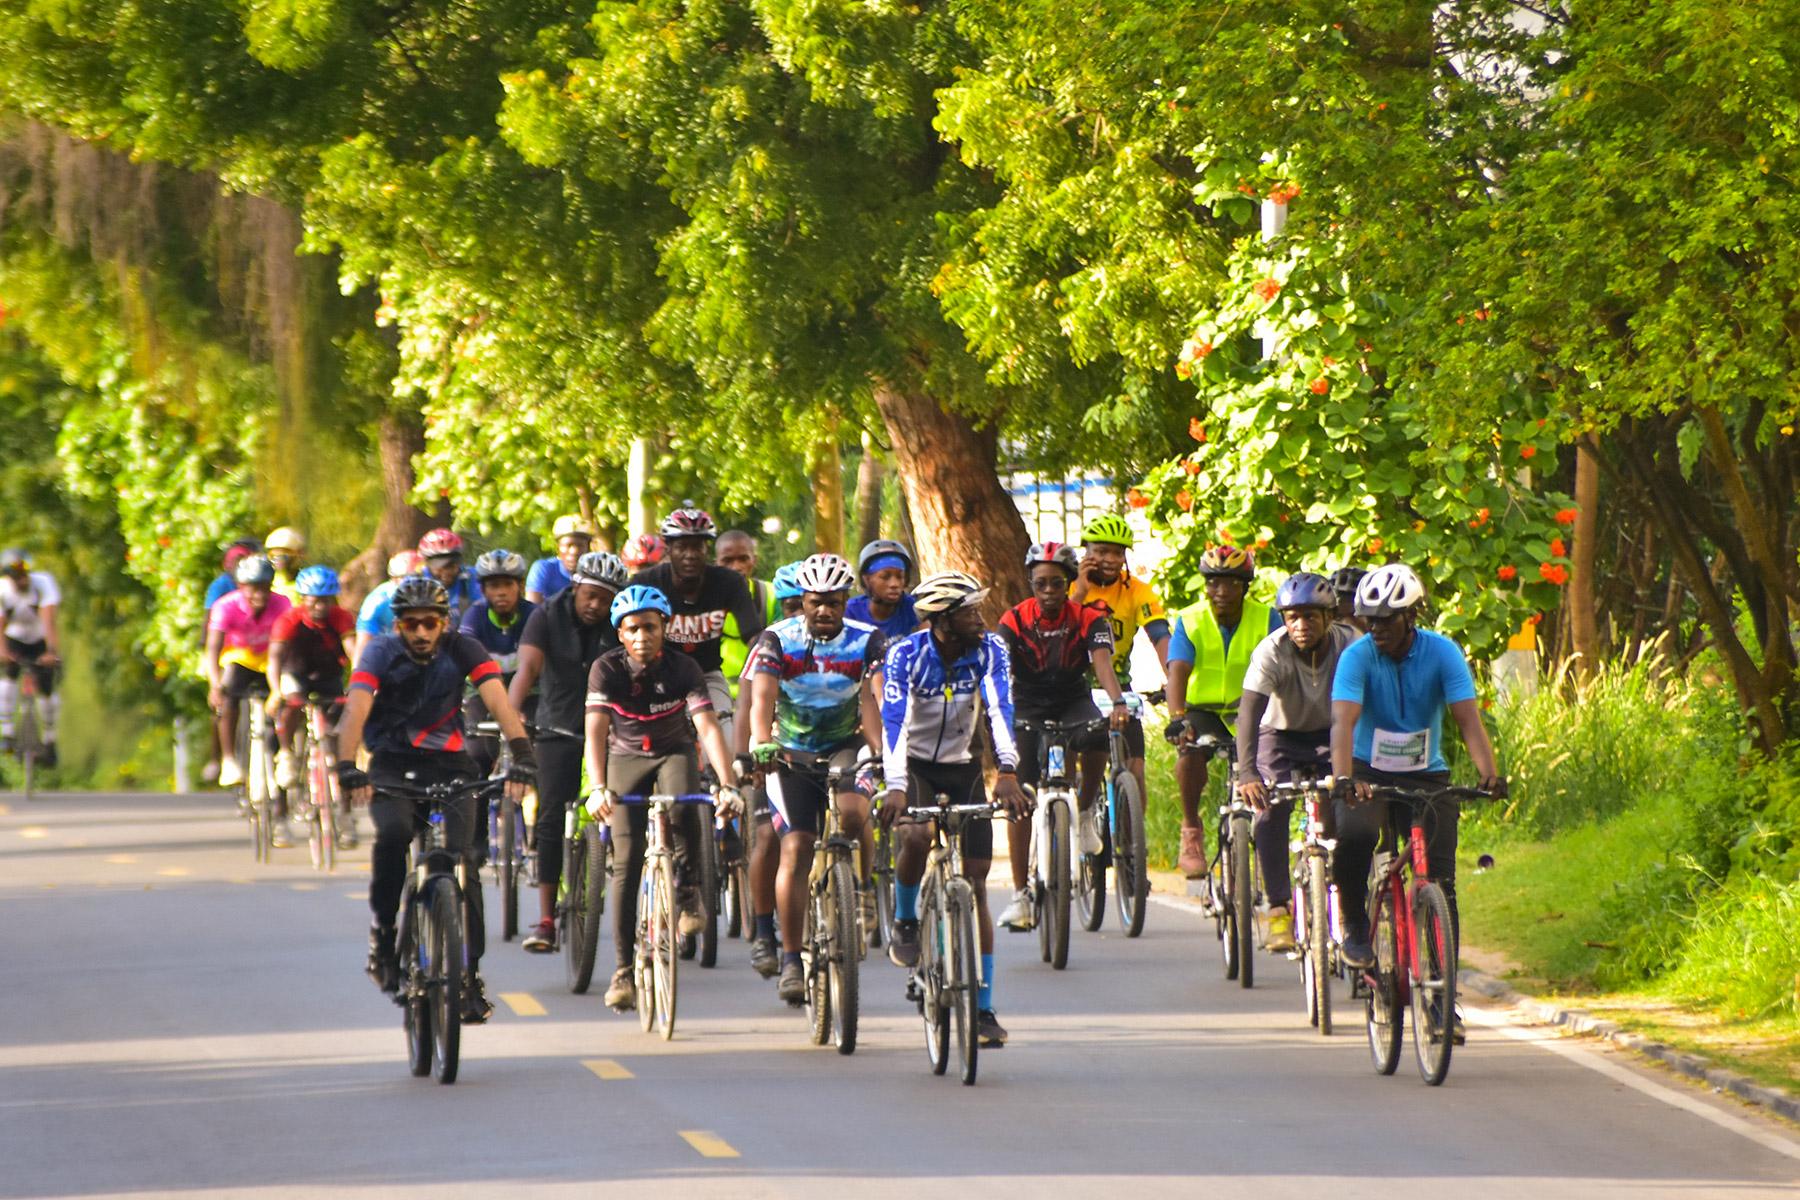 Maro Maua and his supporters cycling through Mombasa